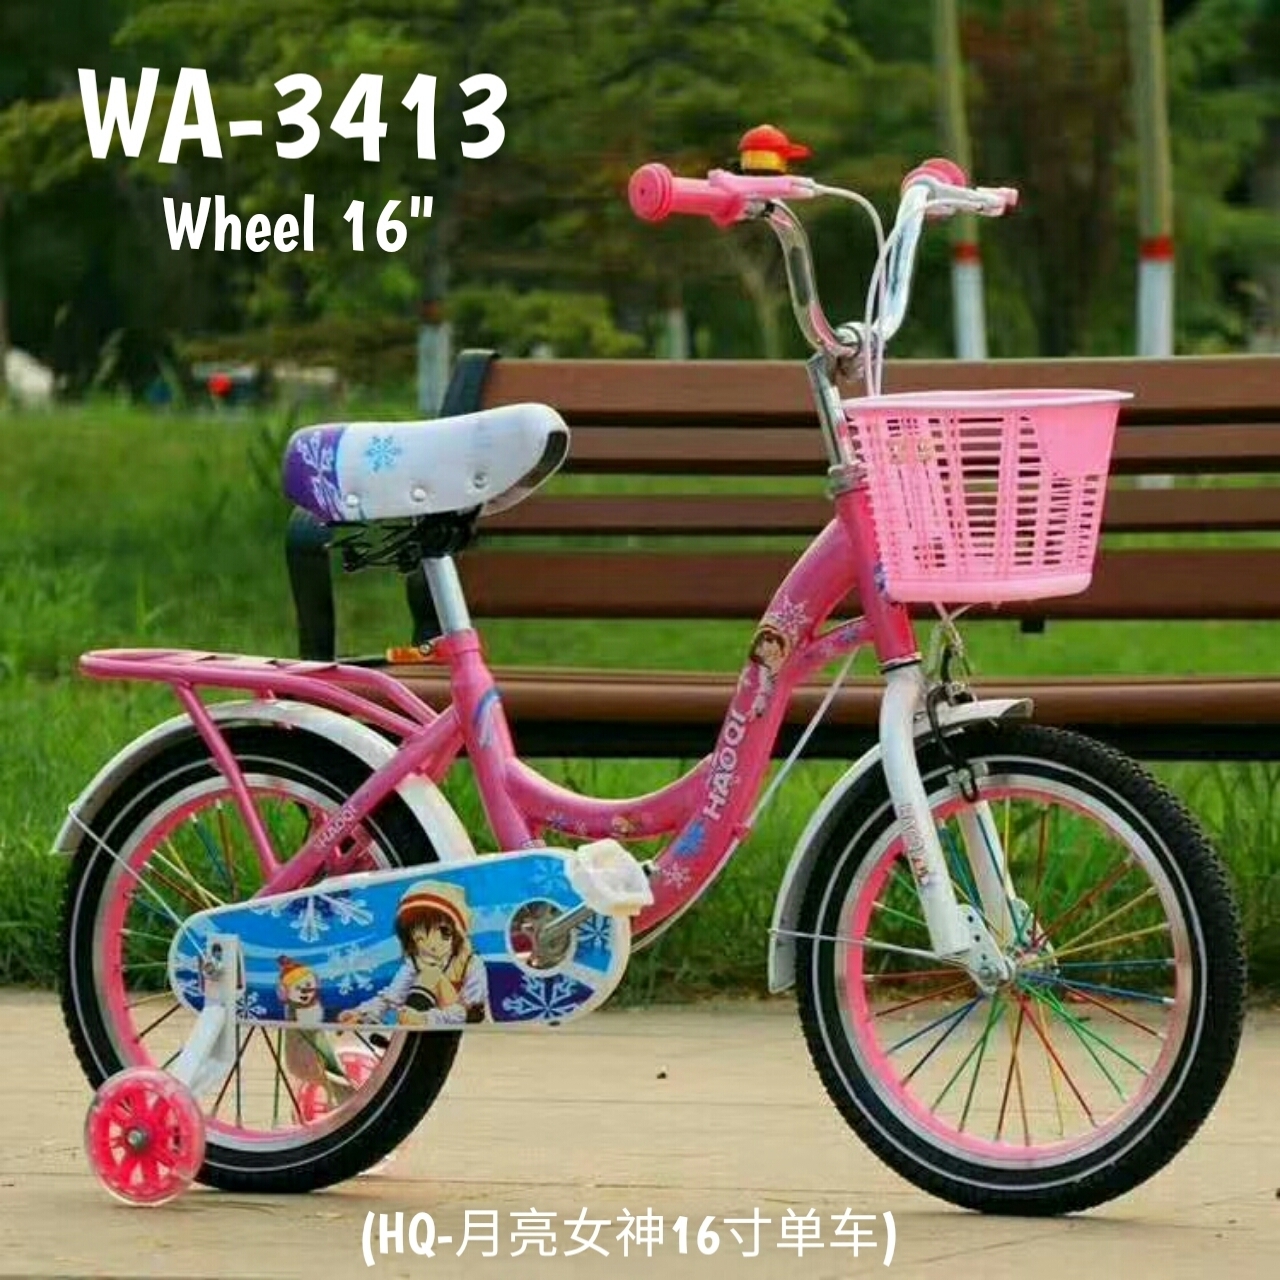 WA-3413 Kids Bicycle 16" Wheel (Walk in Purchase Only 